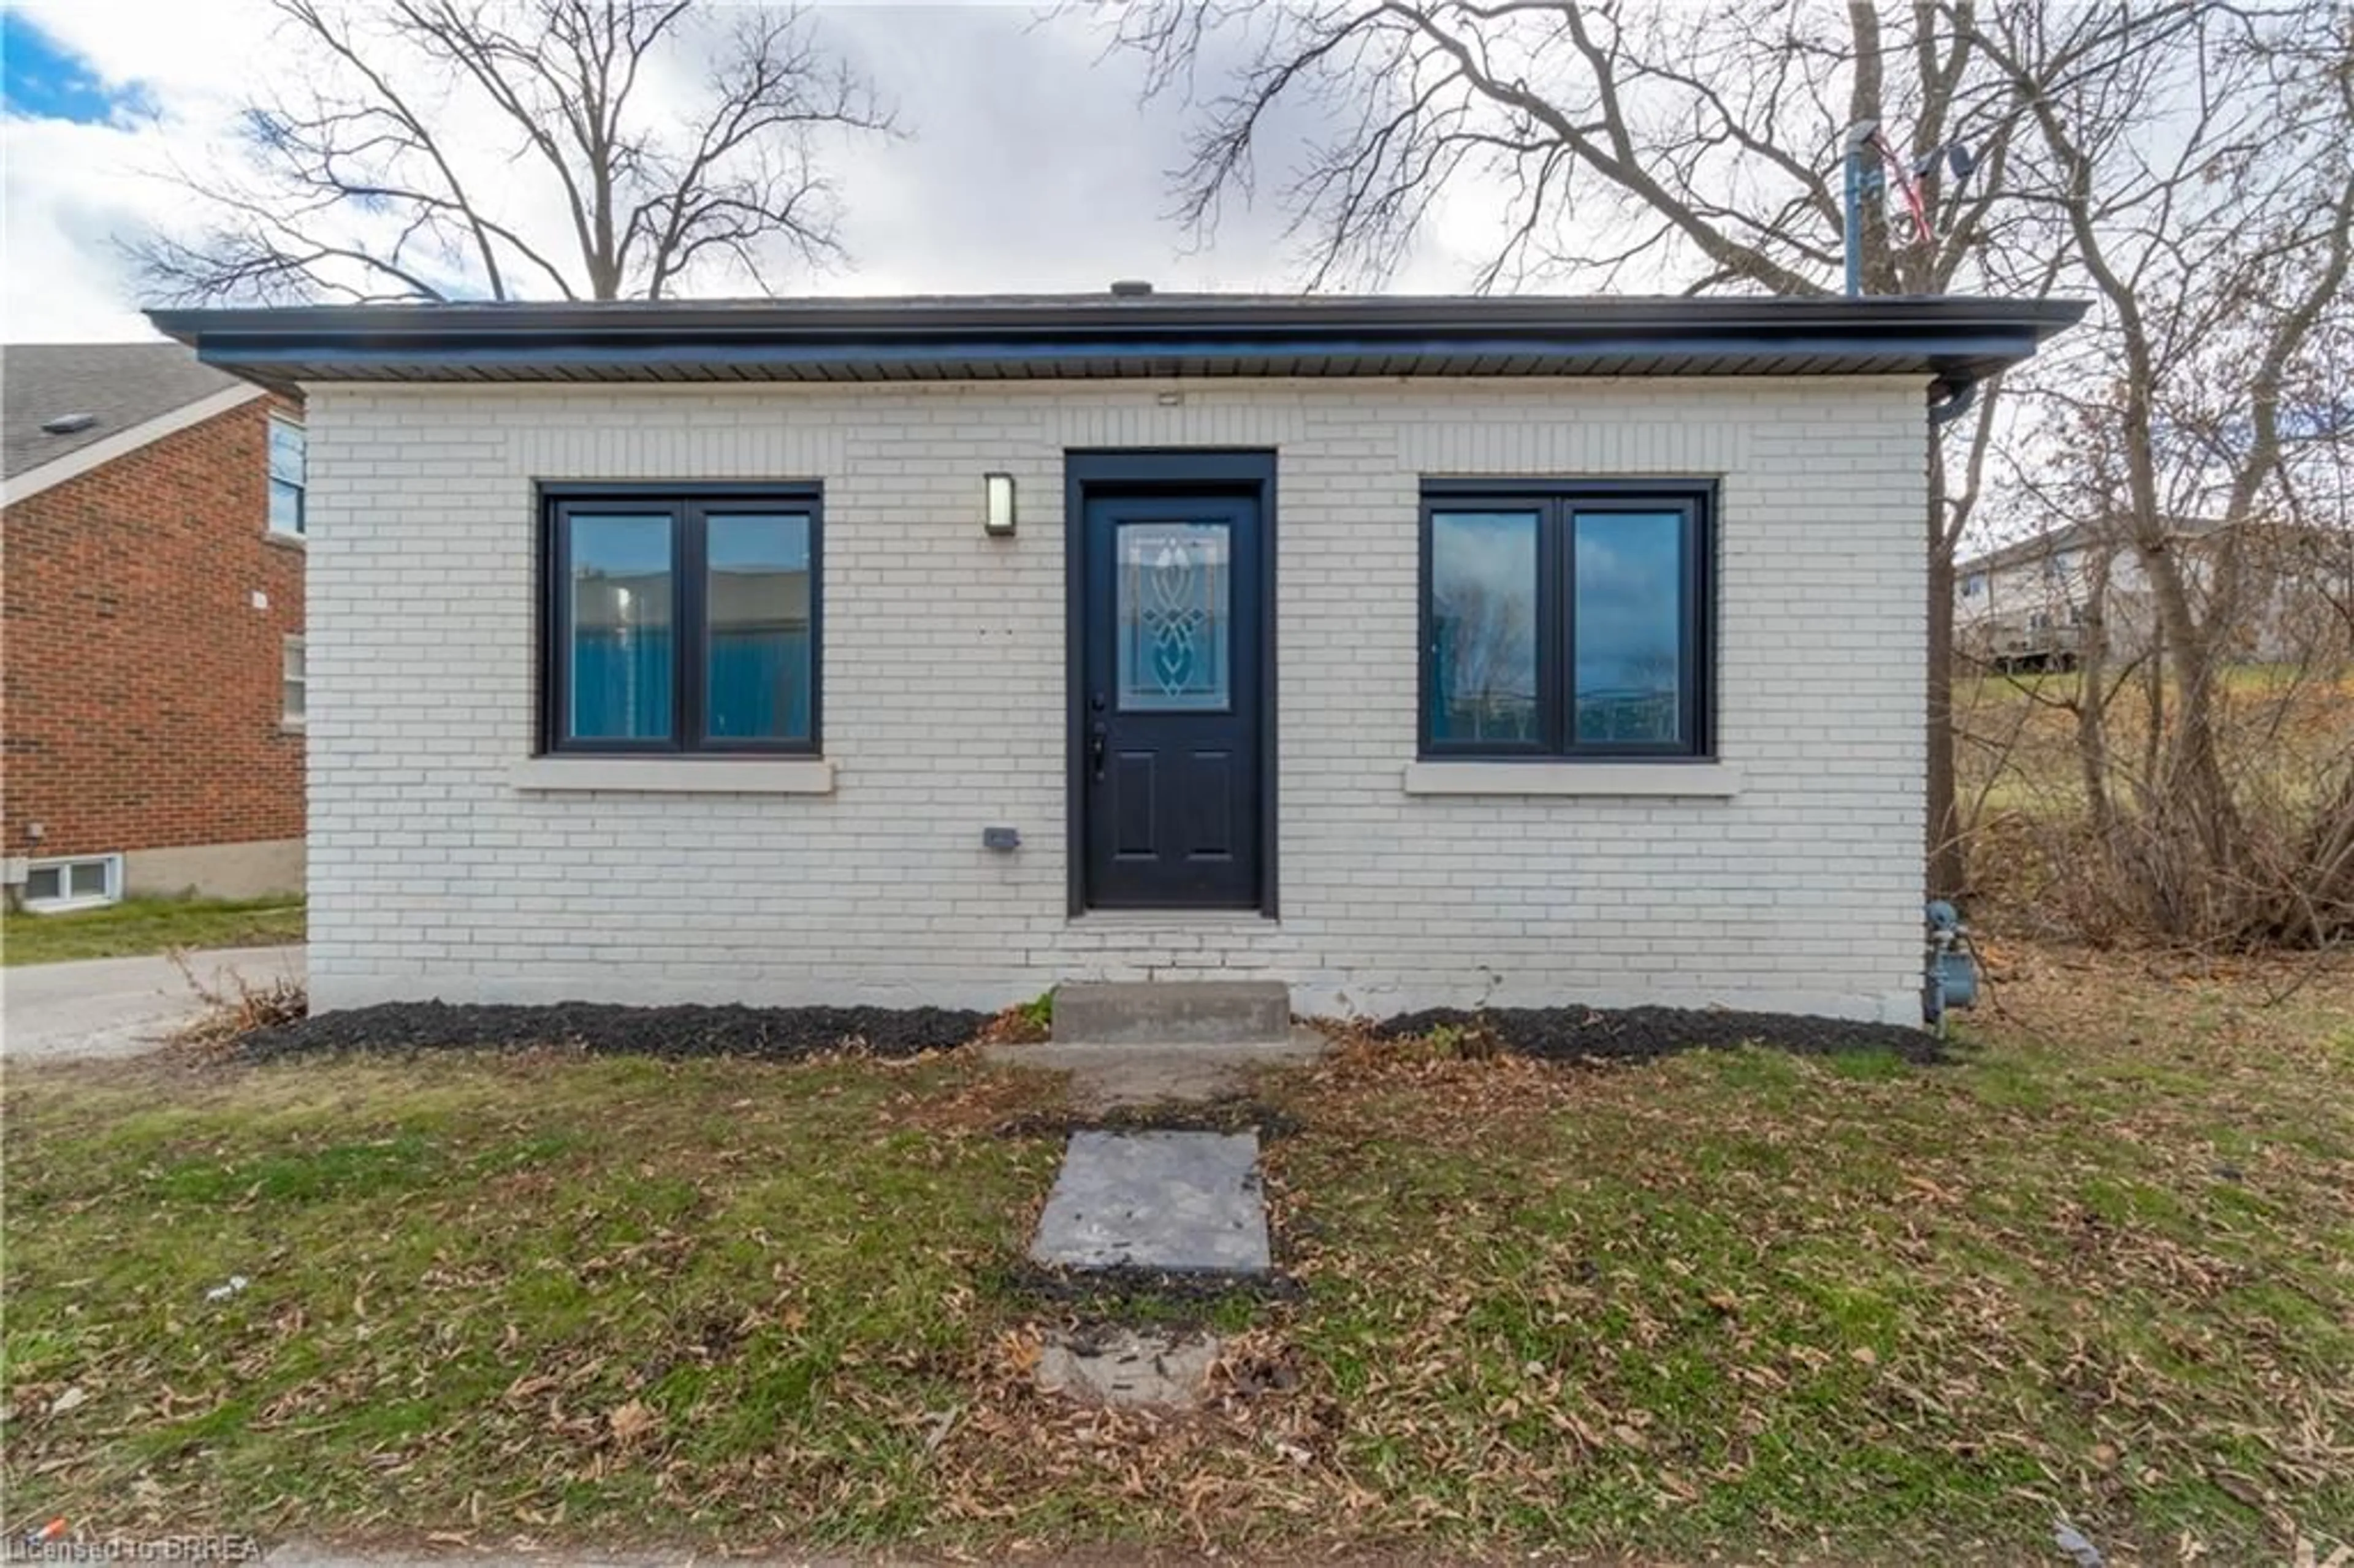 Home with brick exterior material for 254 Colborne St, Brantford Ontario N3T 1L9